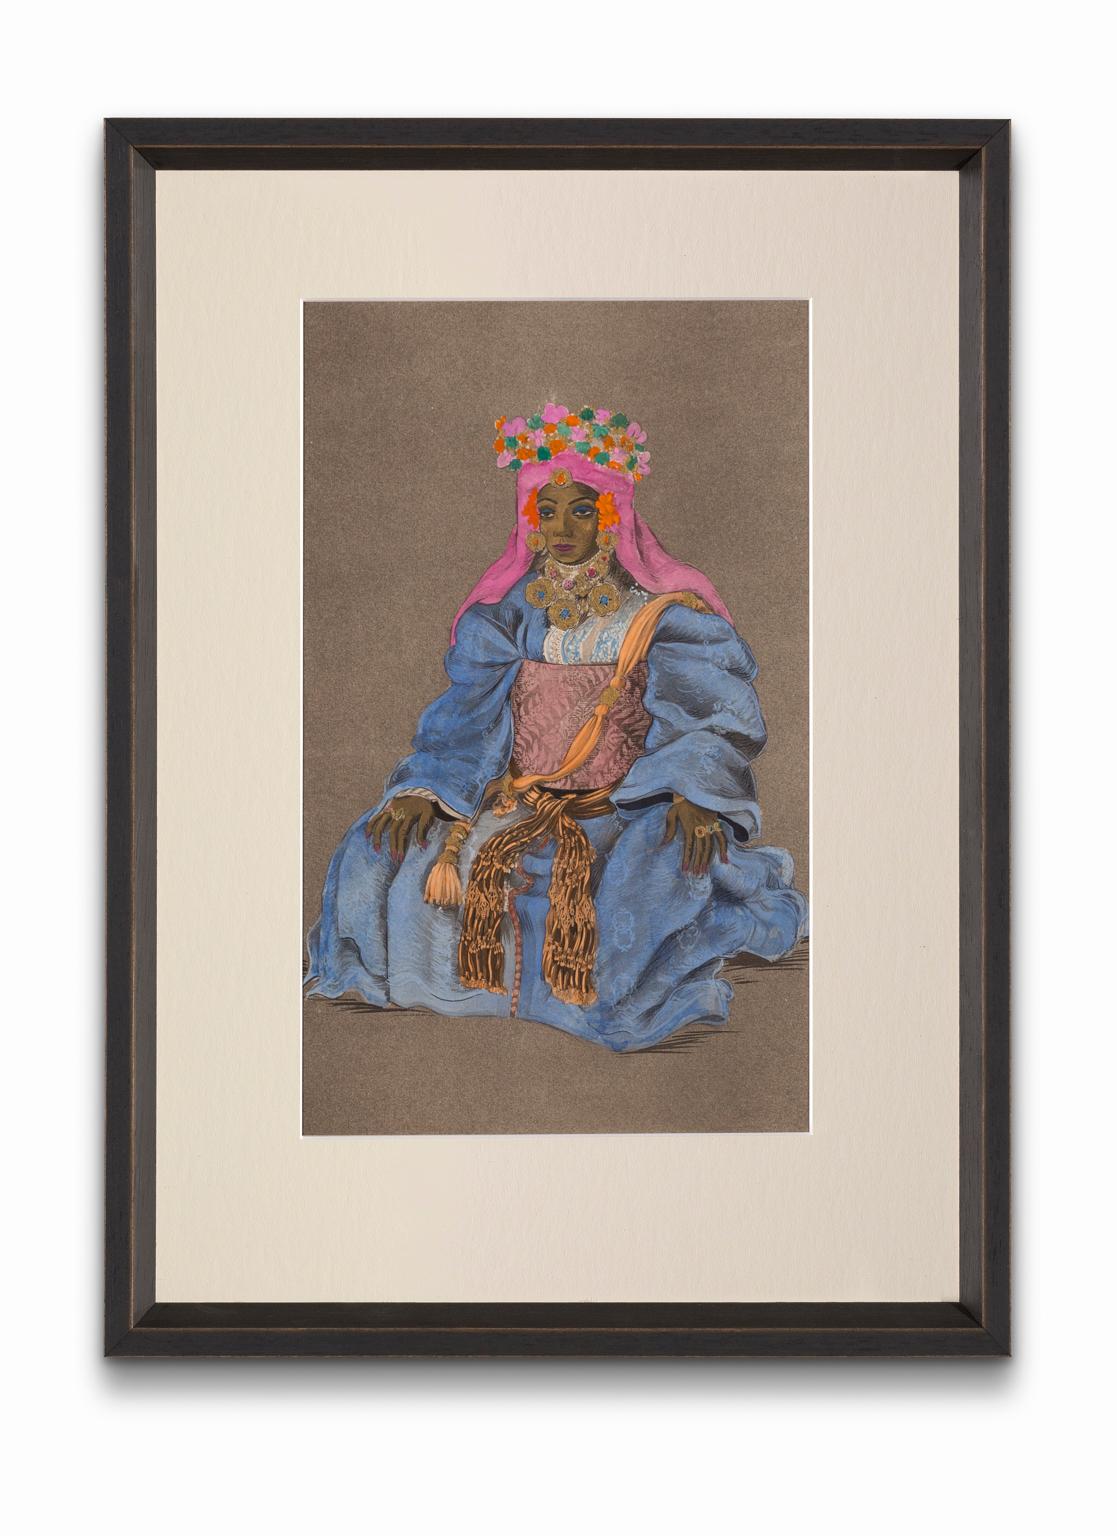 Jean Besancenot Portrait Print - "Formal Dress Called <Of The Maghzen>", from "Costumes of Morocco"